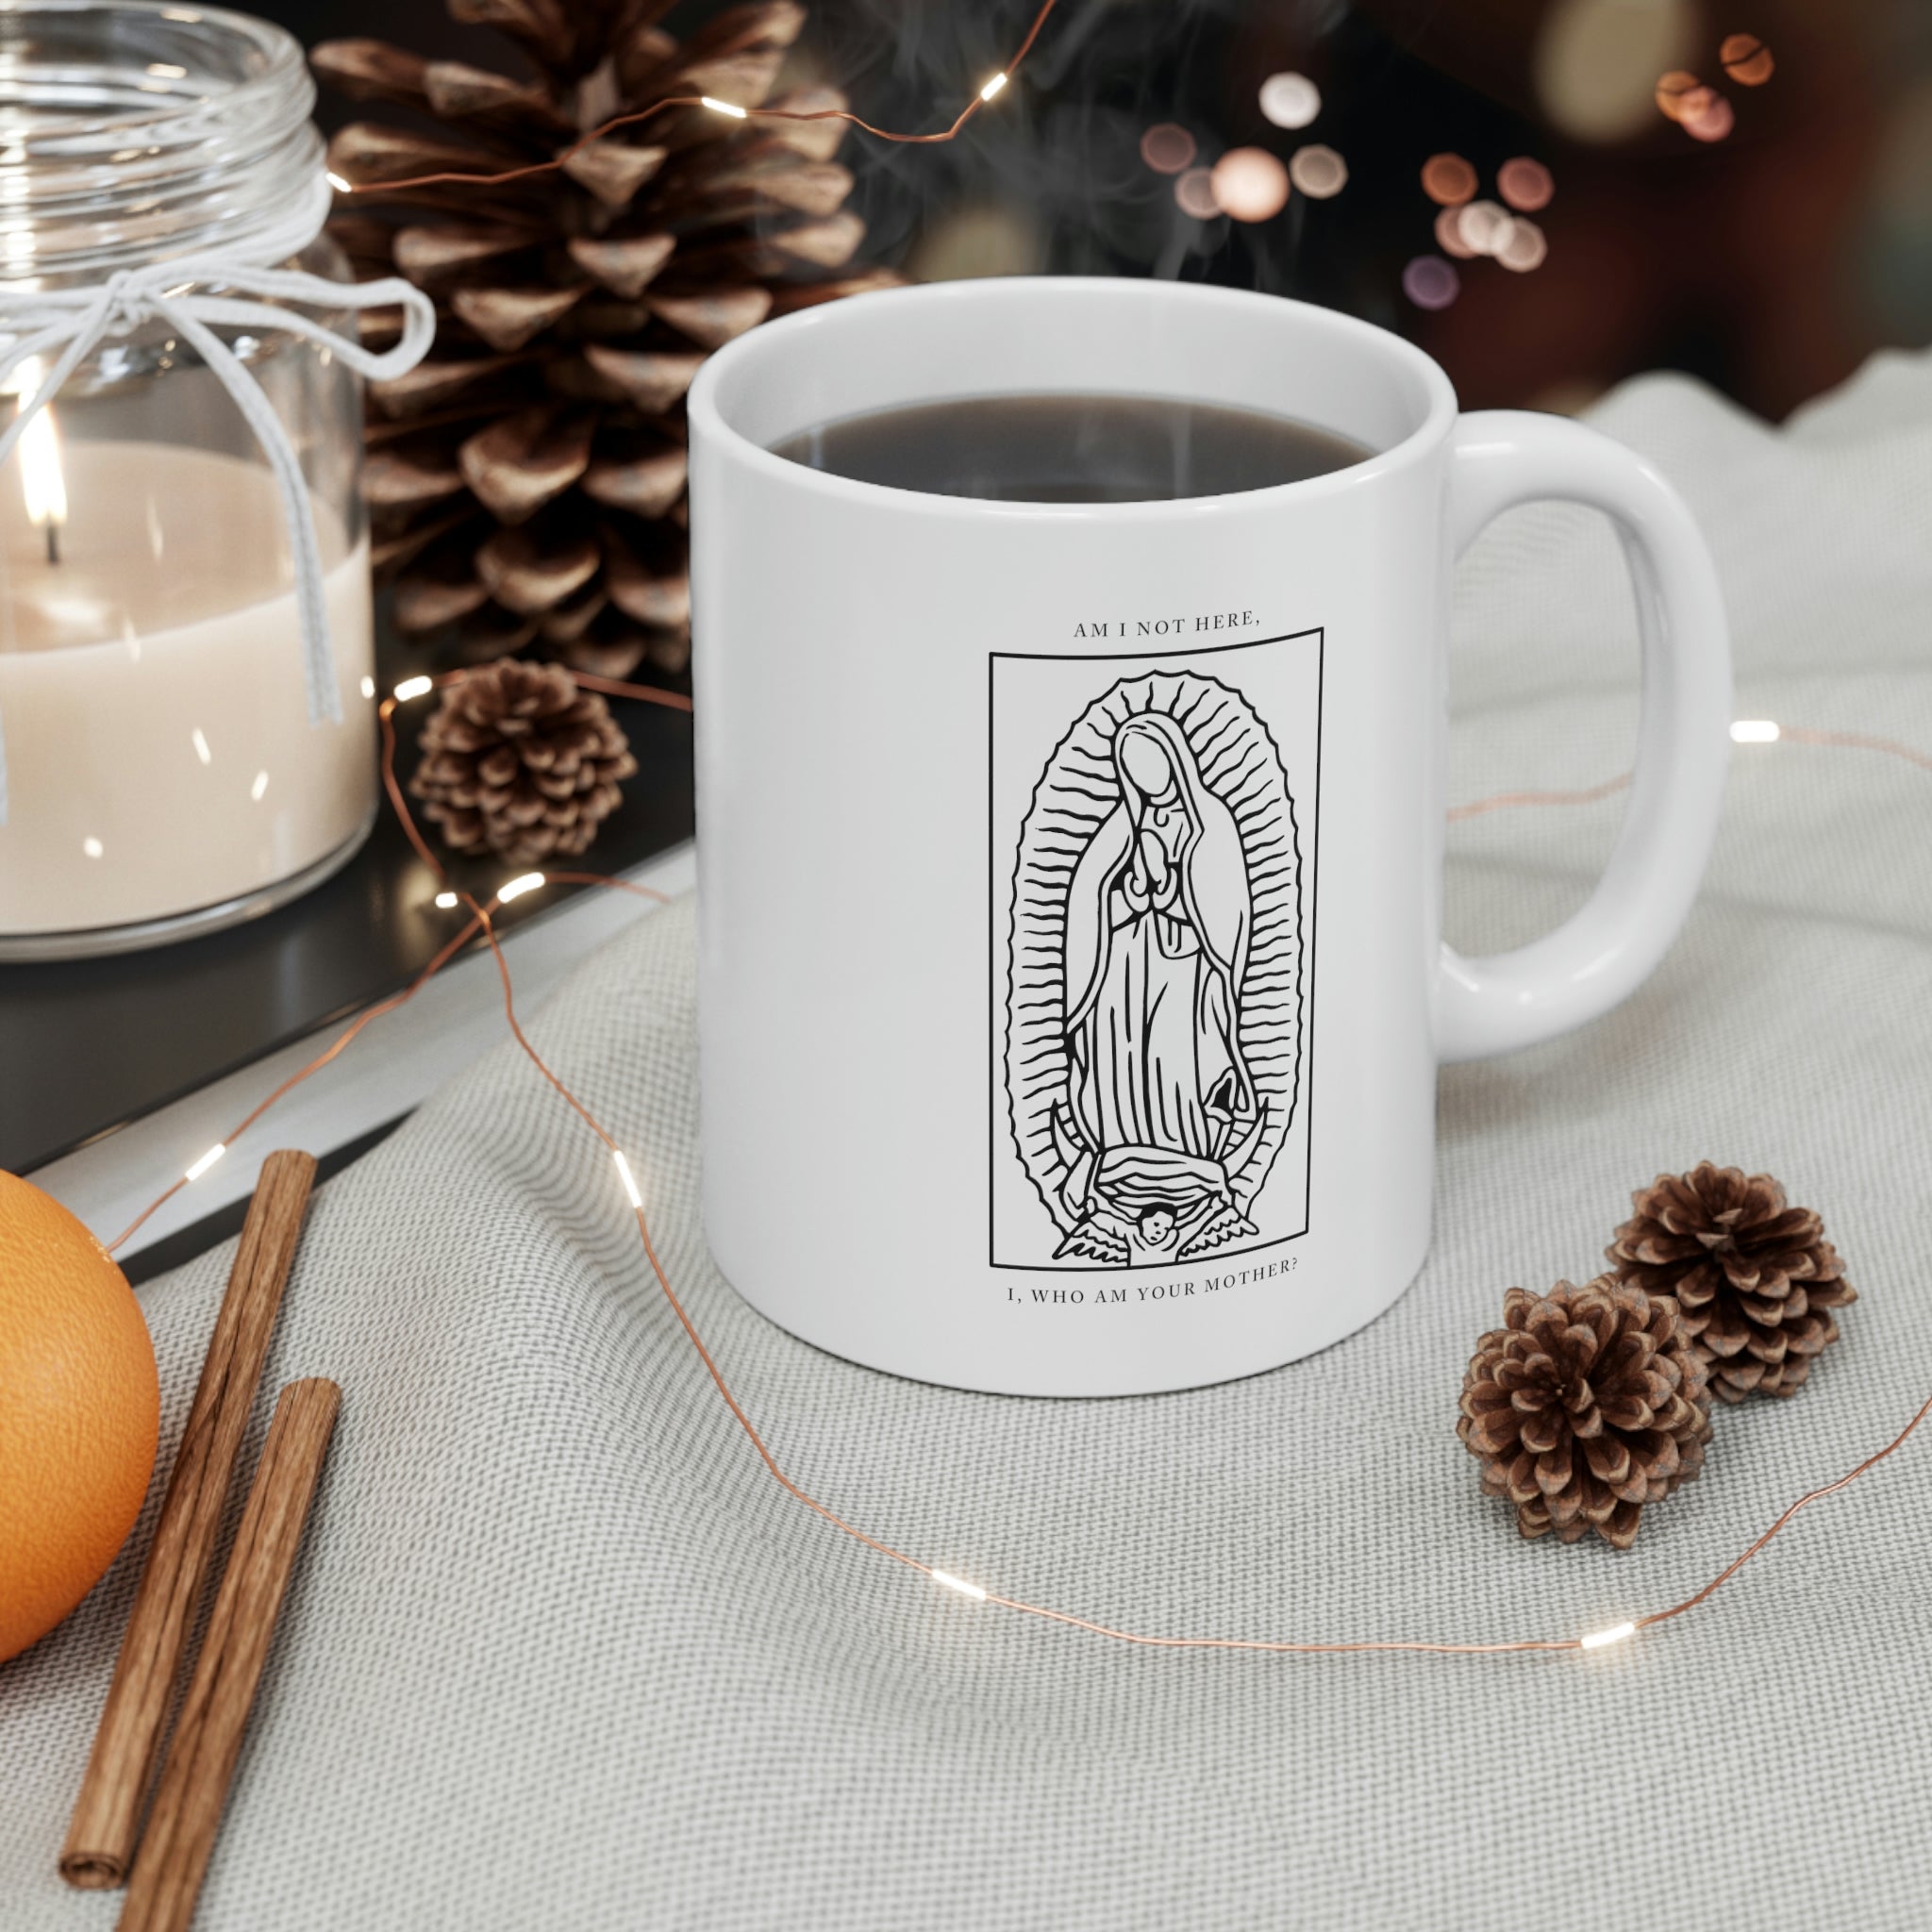 Our Lady of Guadalupe Coffee Mug